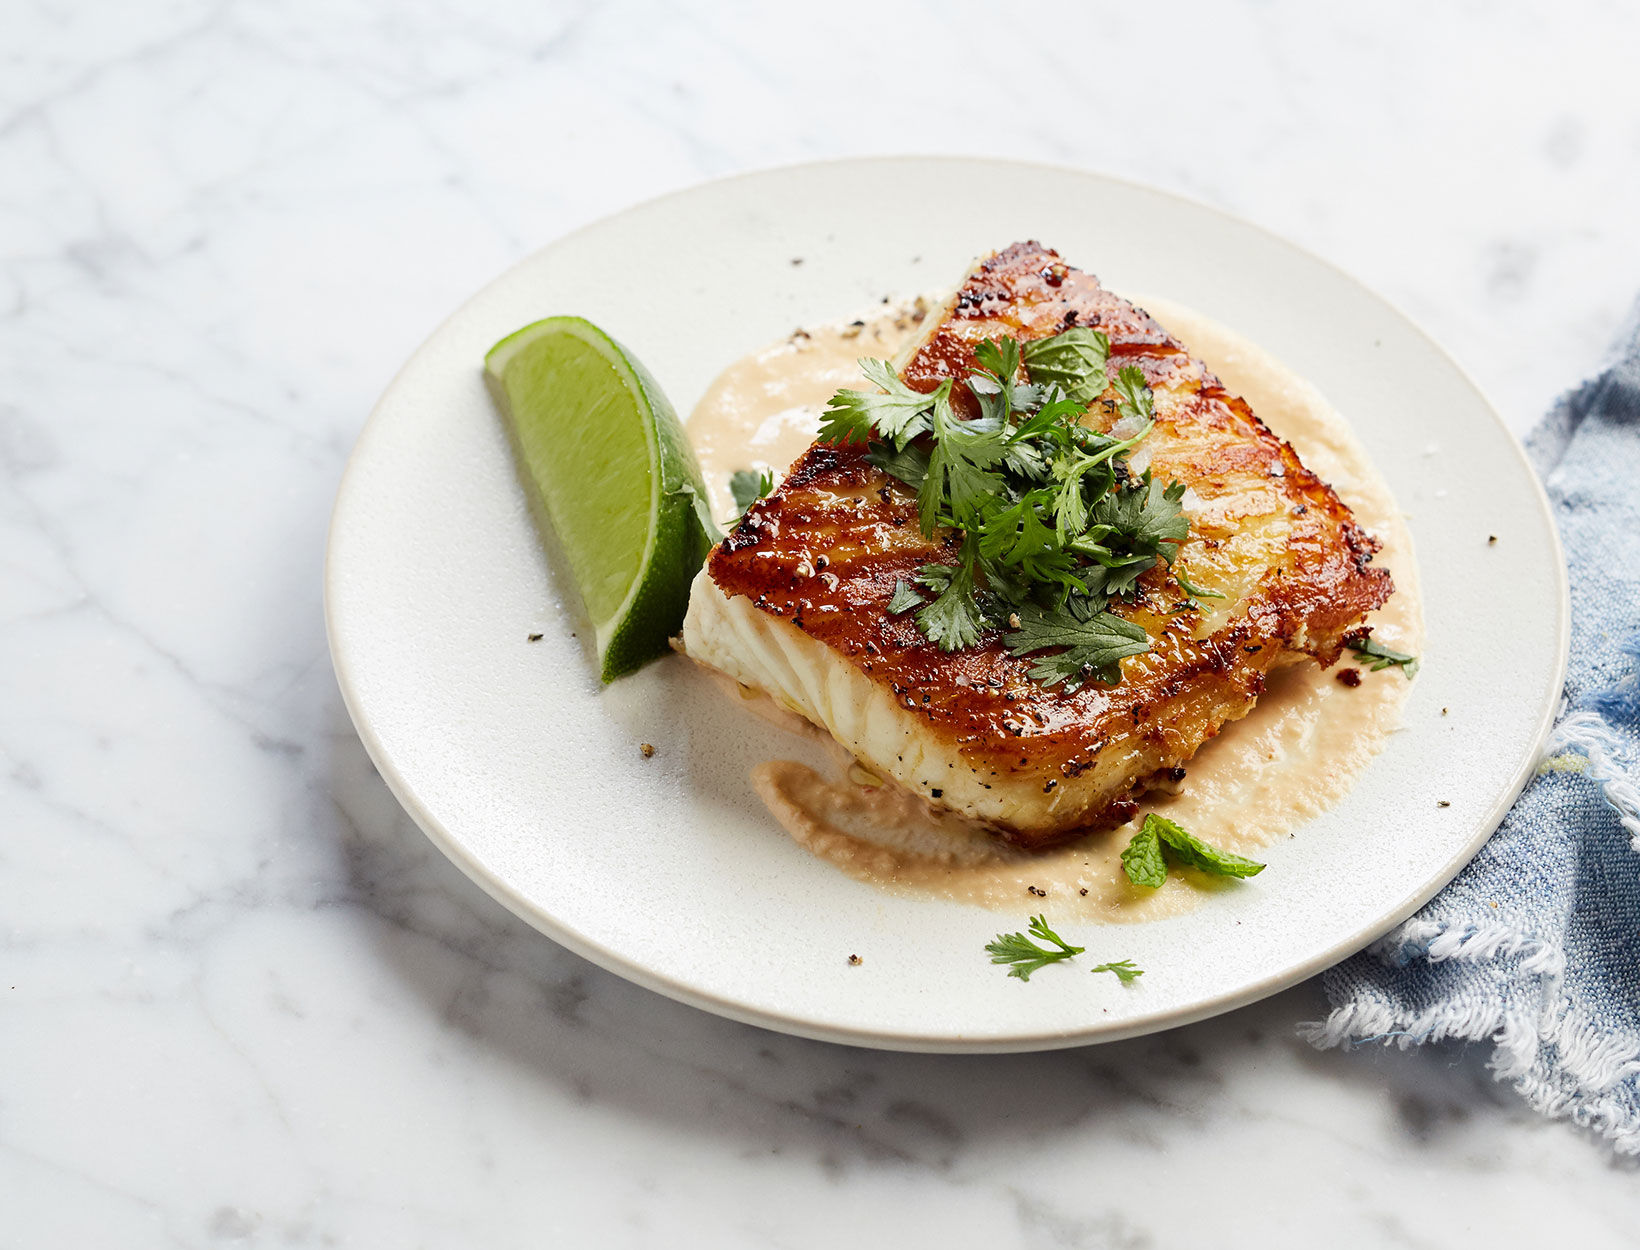 Pan-Seared Halibut with Peanut Drizzle and Herbs